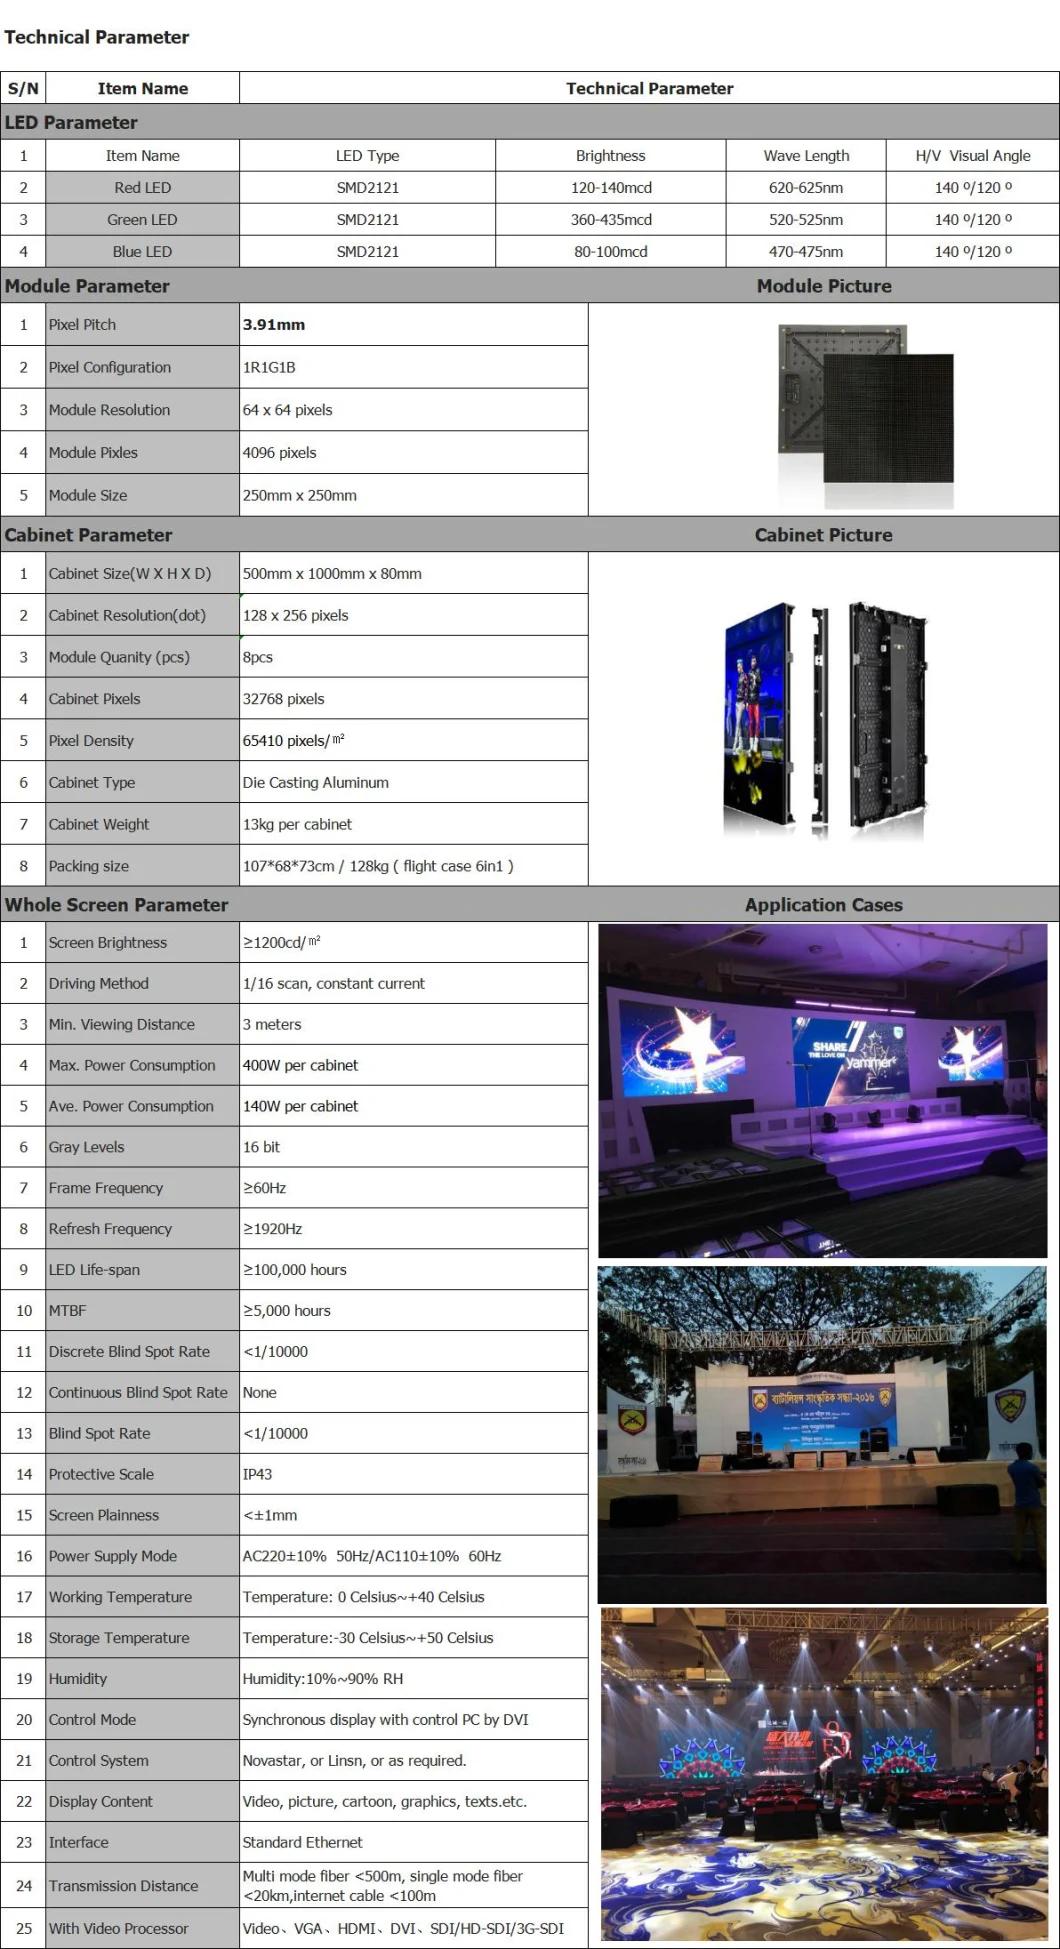 Stage Background Video Display Panel LED Advertising Screen for Rental Purpose